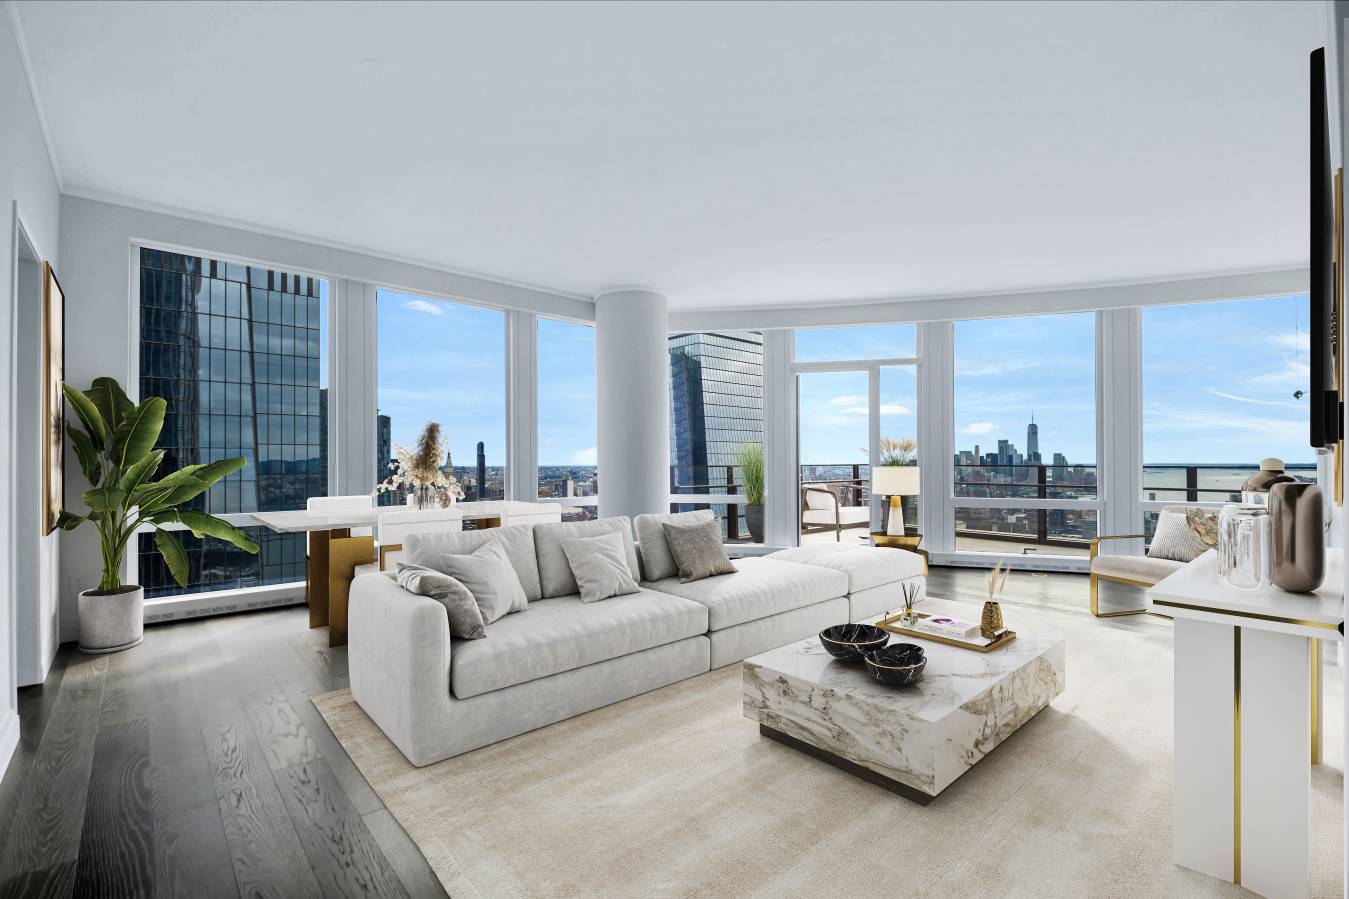 3100 sqft apartment with 200 sqft private terrace with sweeping views from the 63rd floor facing south !